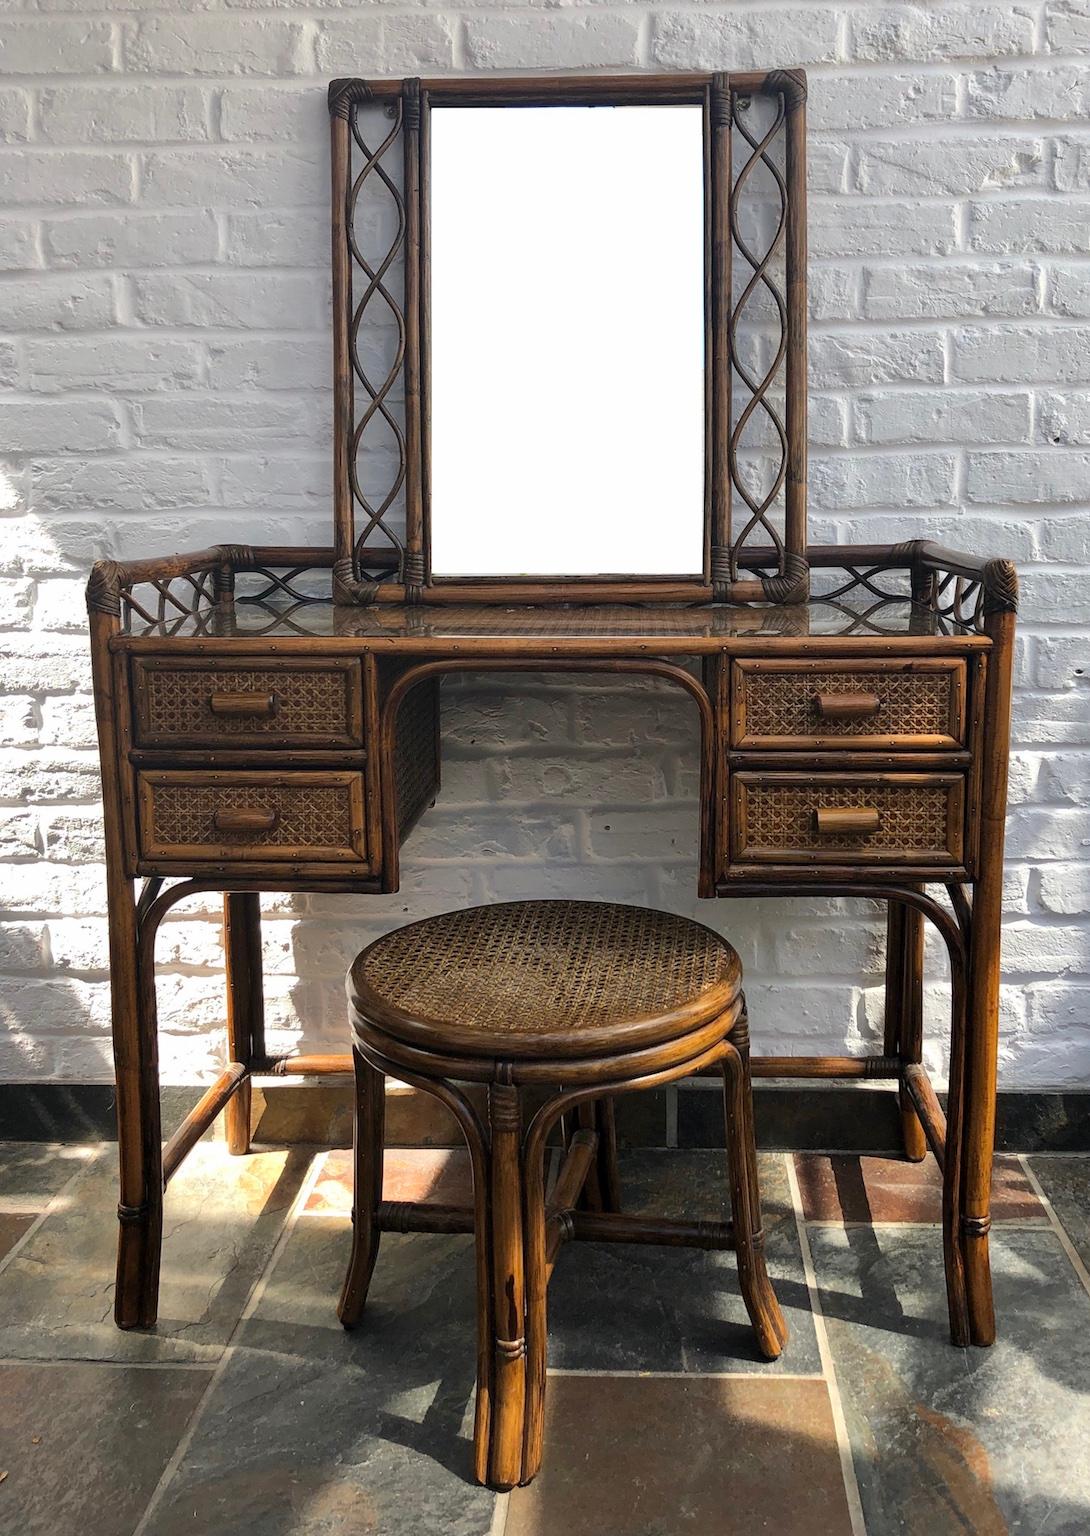 Midcentury rattan cane dressing table or small desk, stool and mirror set, England, 1970s

This is a beautiful set consisting of a dressing table or small desk, matching stool and wall mirror. 
Made by English company ‘Angraves of Leicester’, who